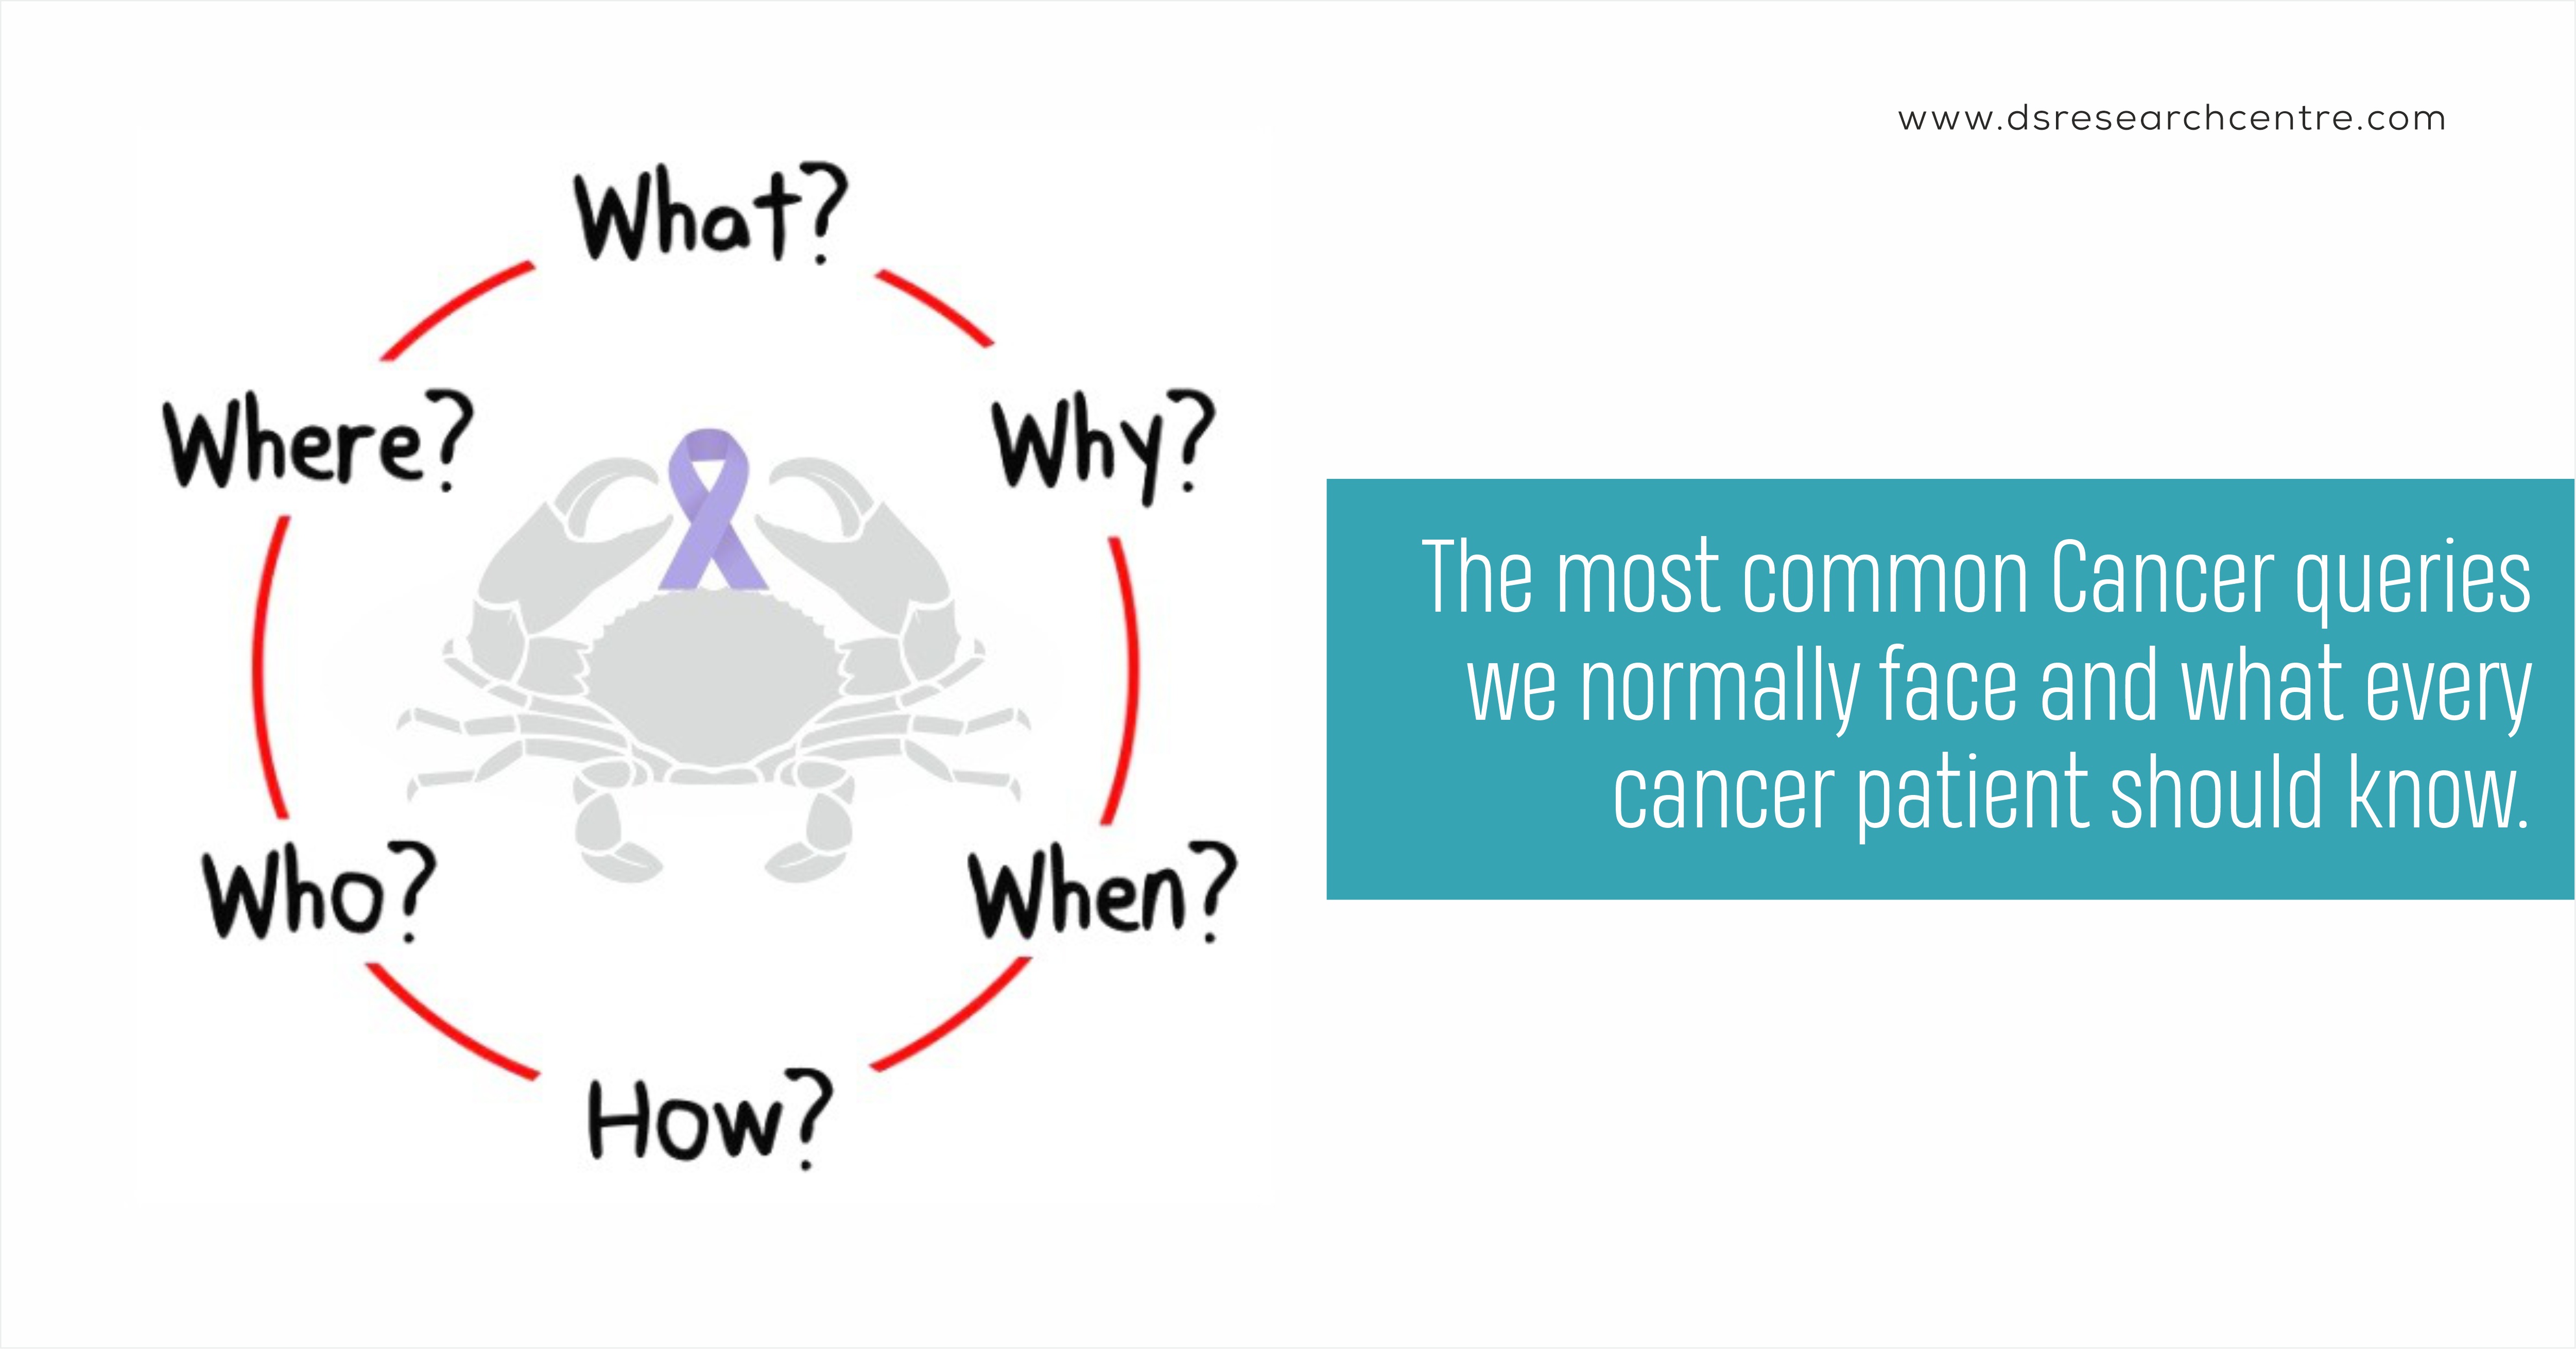 The most common Cancer queries we normally face and what every cancer patient should know